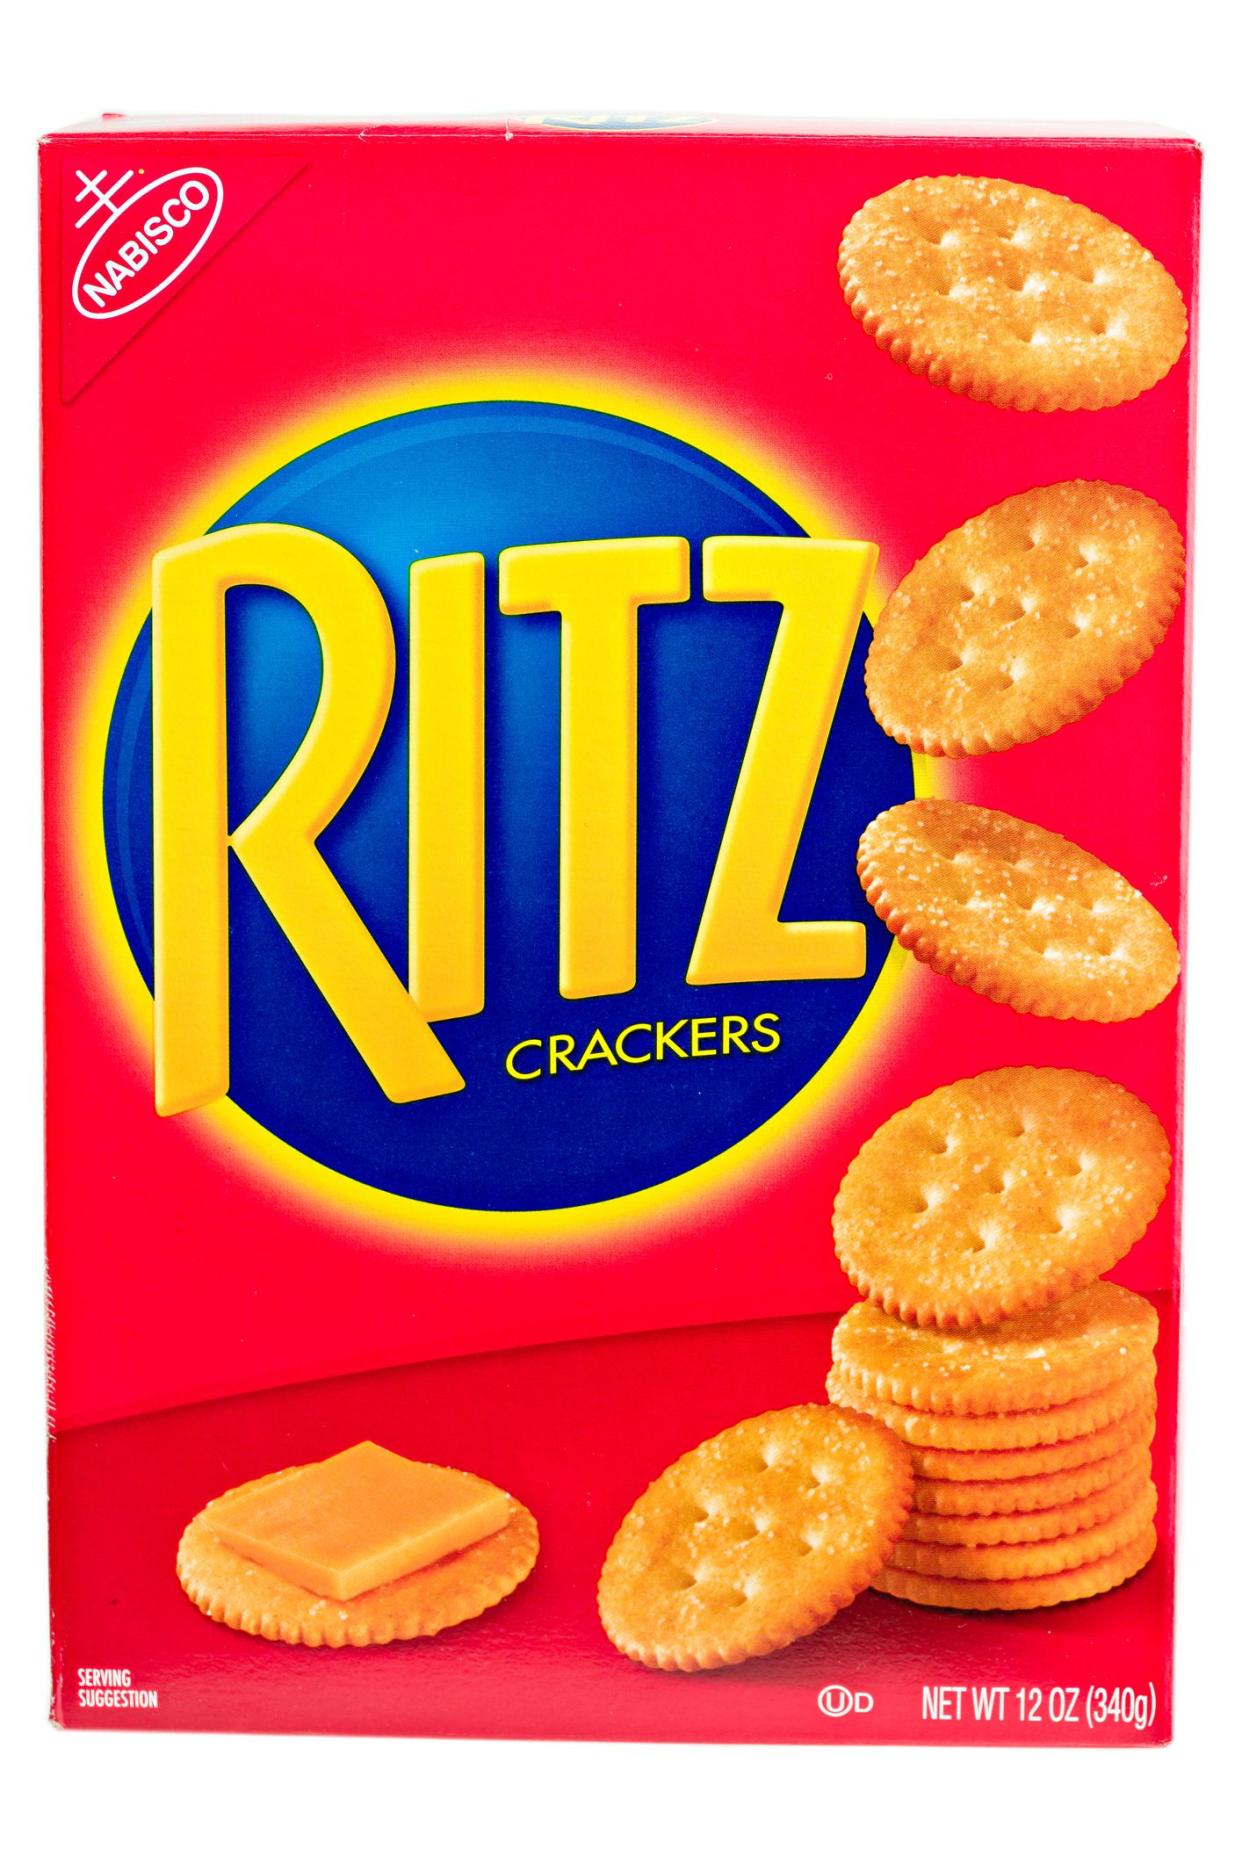 Chico, California, USA - August 10, 2011: A close up of a red 12 OZ cardboard box of Nabisco\'s Ritz crackers. Nabisco has been making the Ritz crackers since 1934.